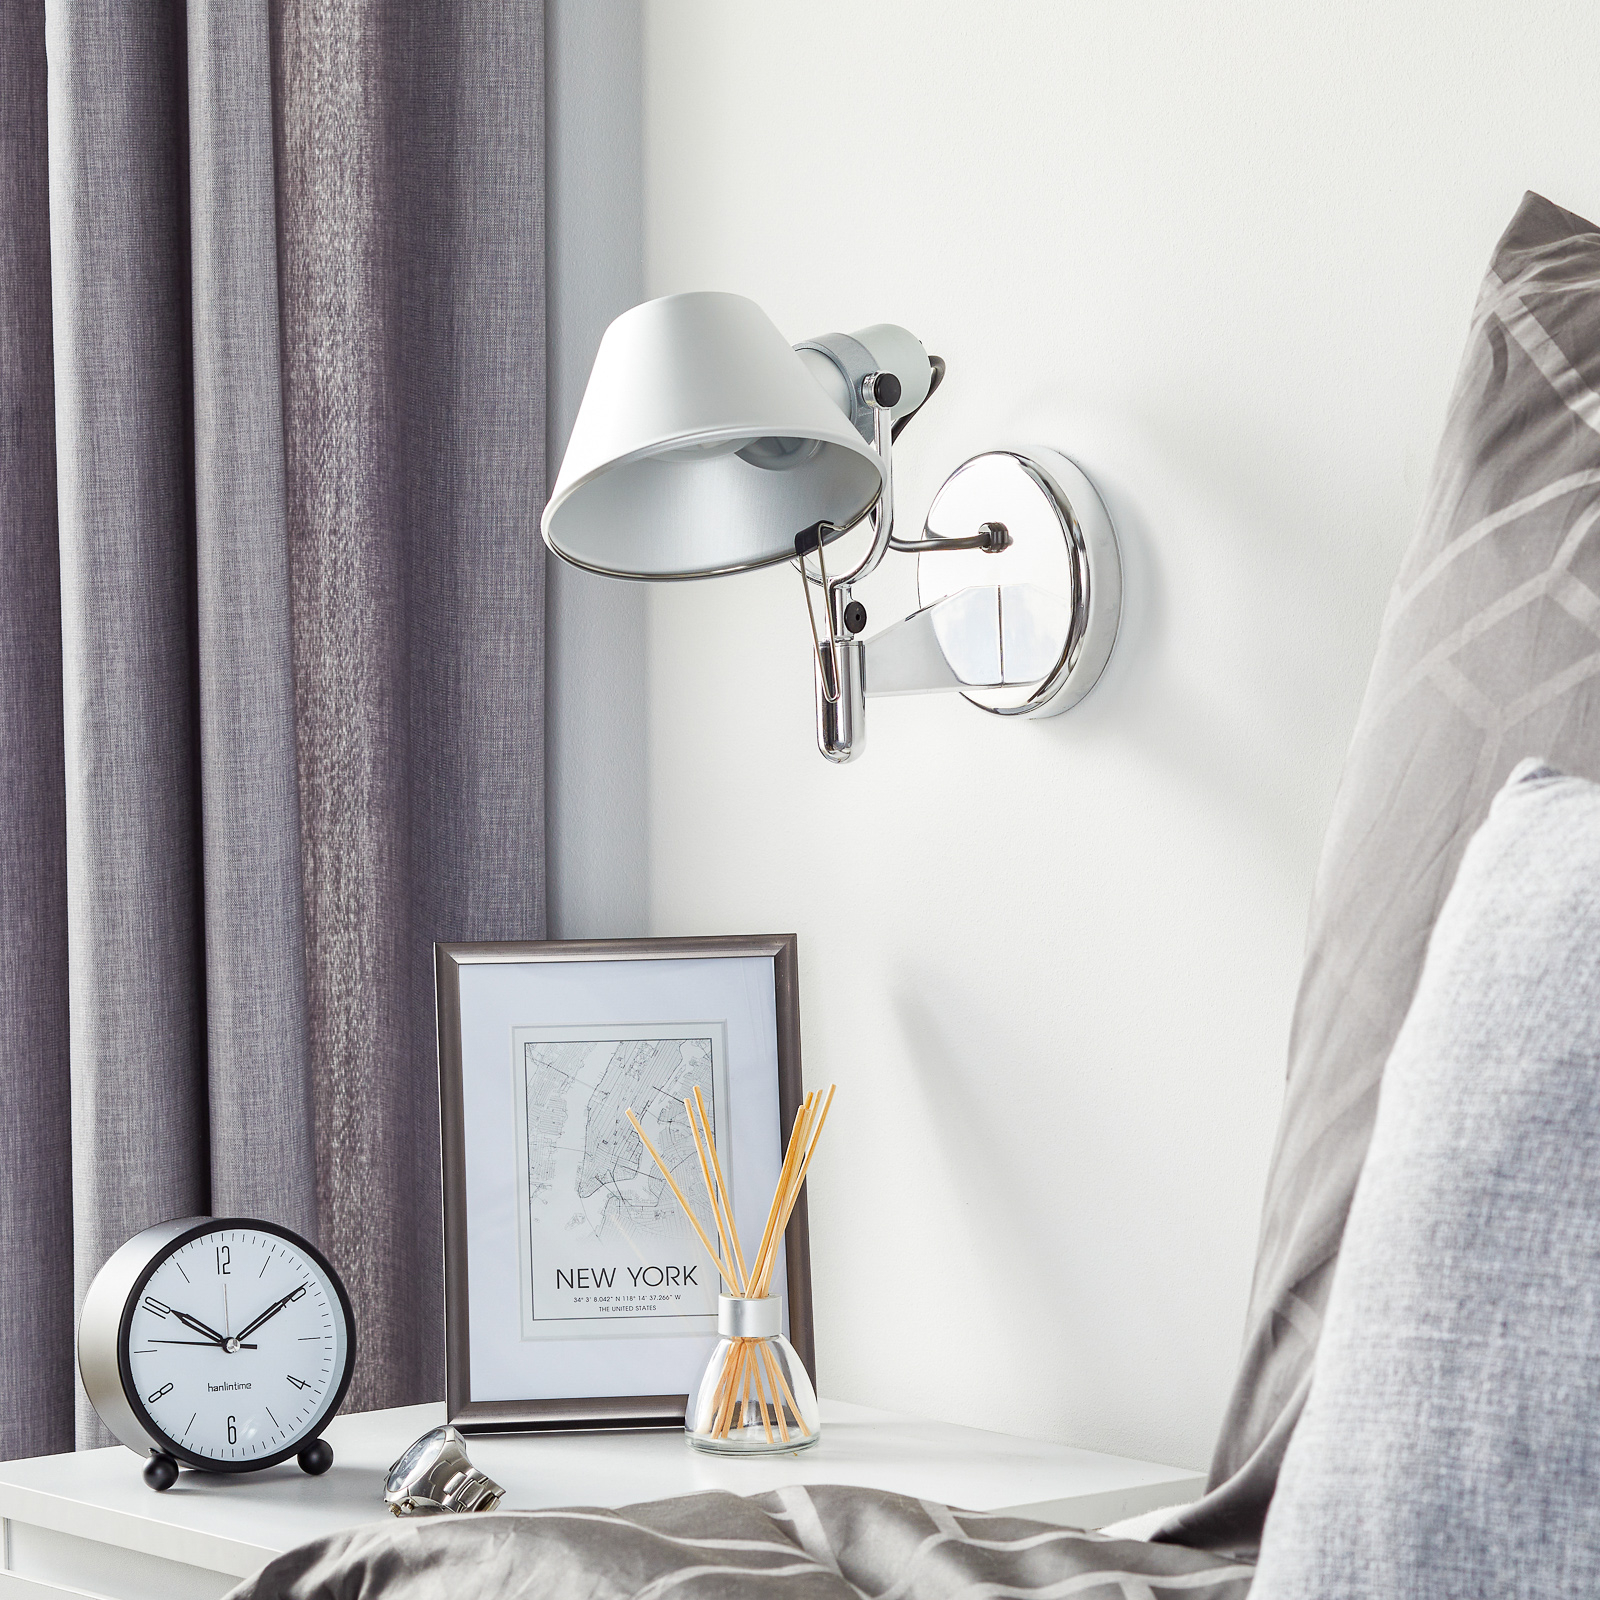 Artemide Tolomeo Faretto without switch, 2,700 K